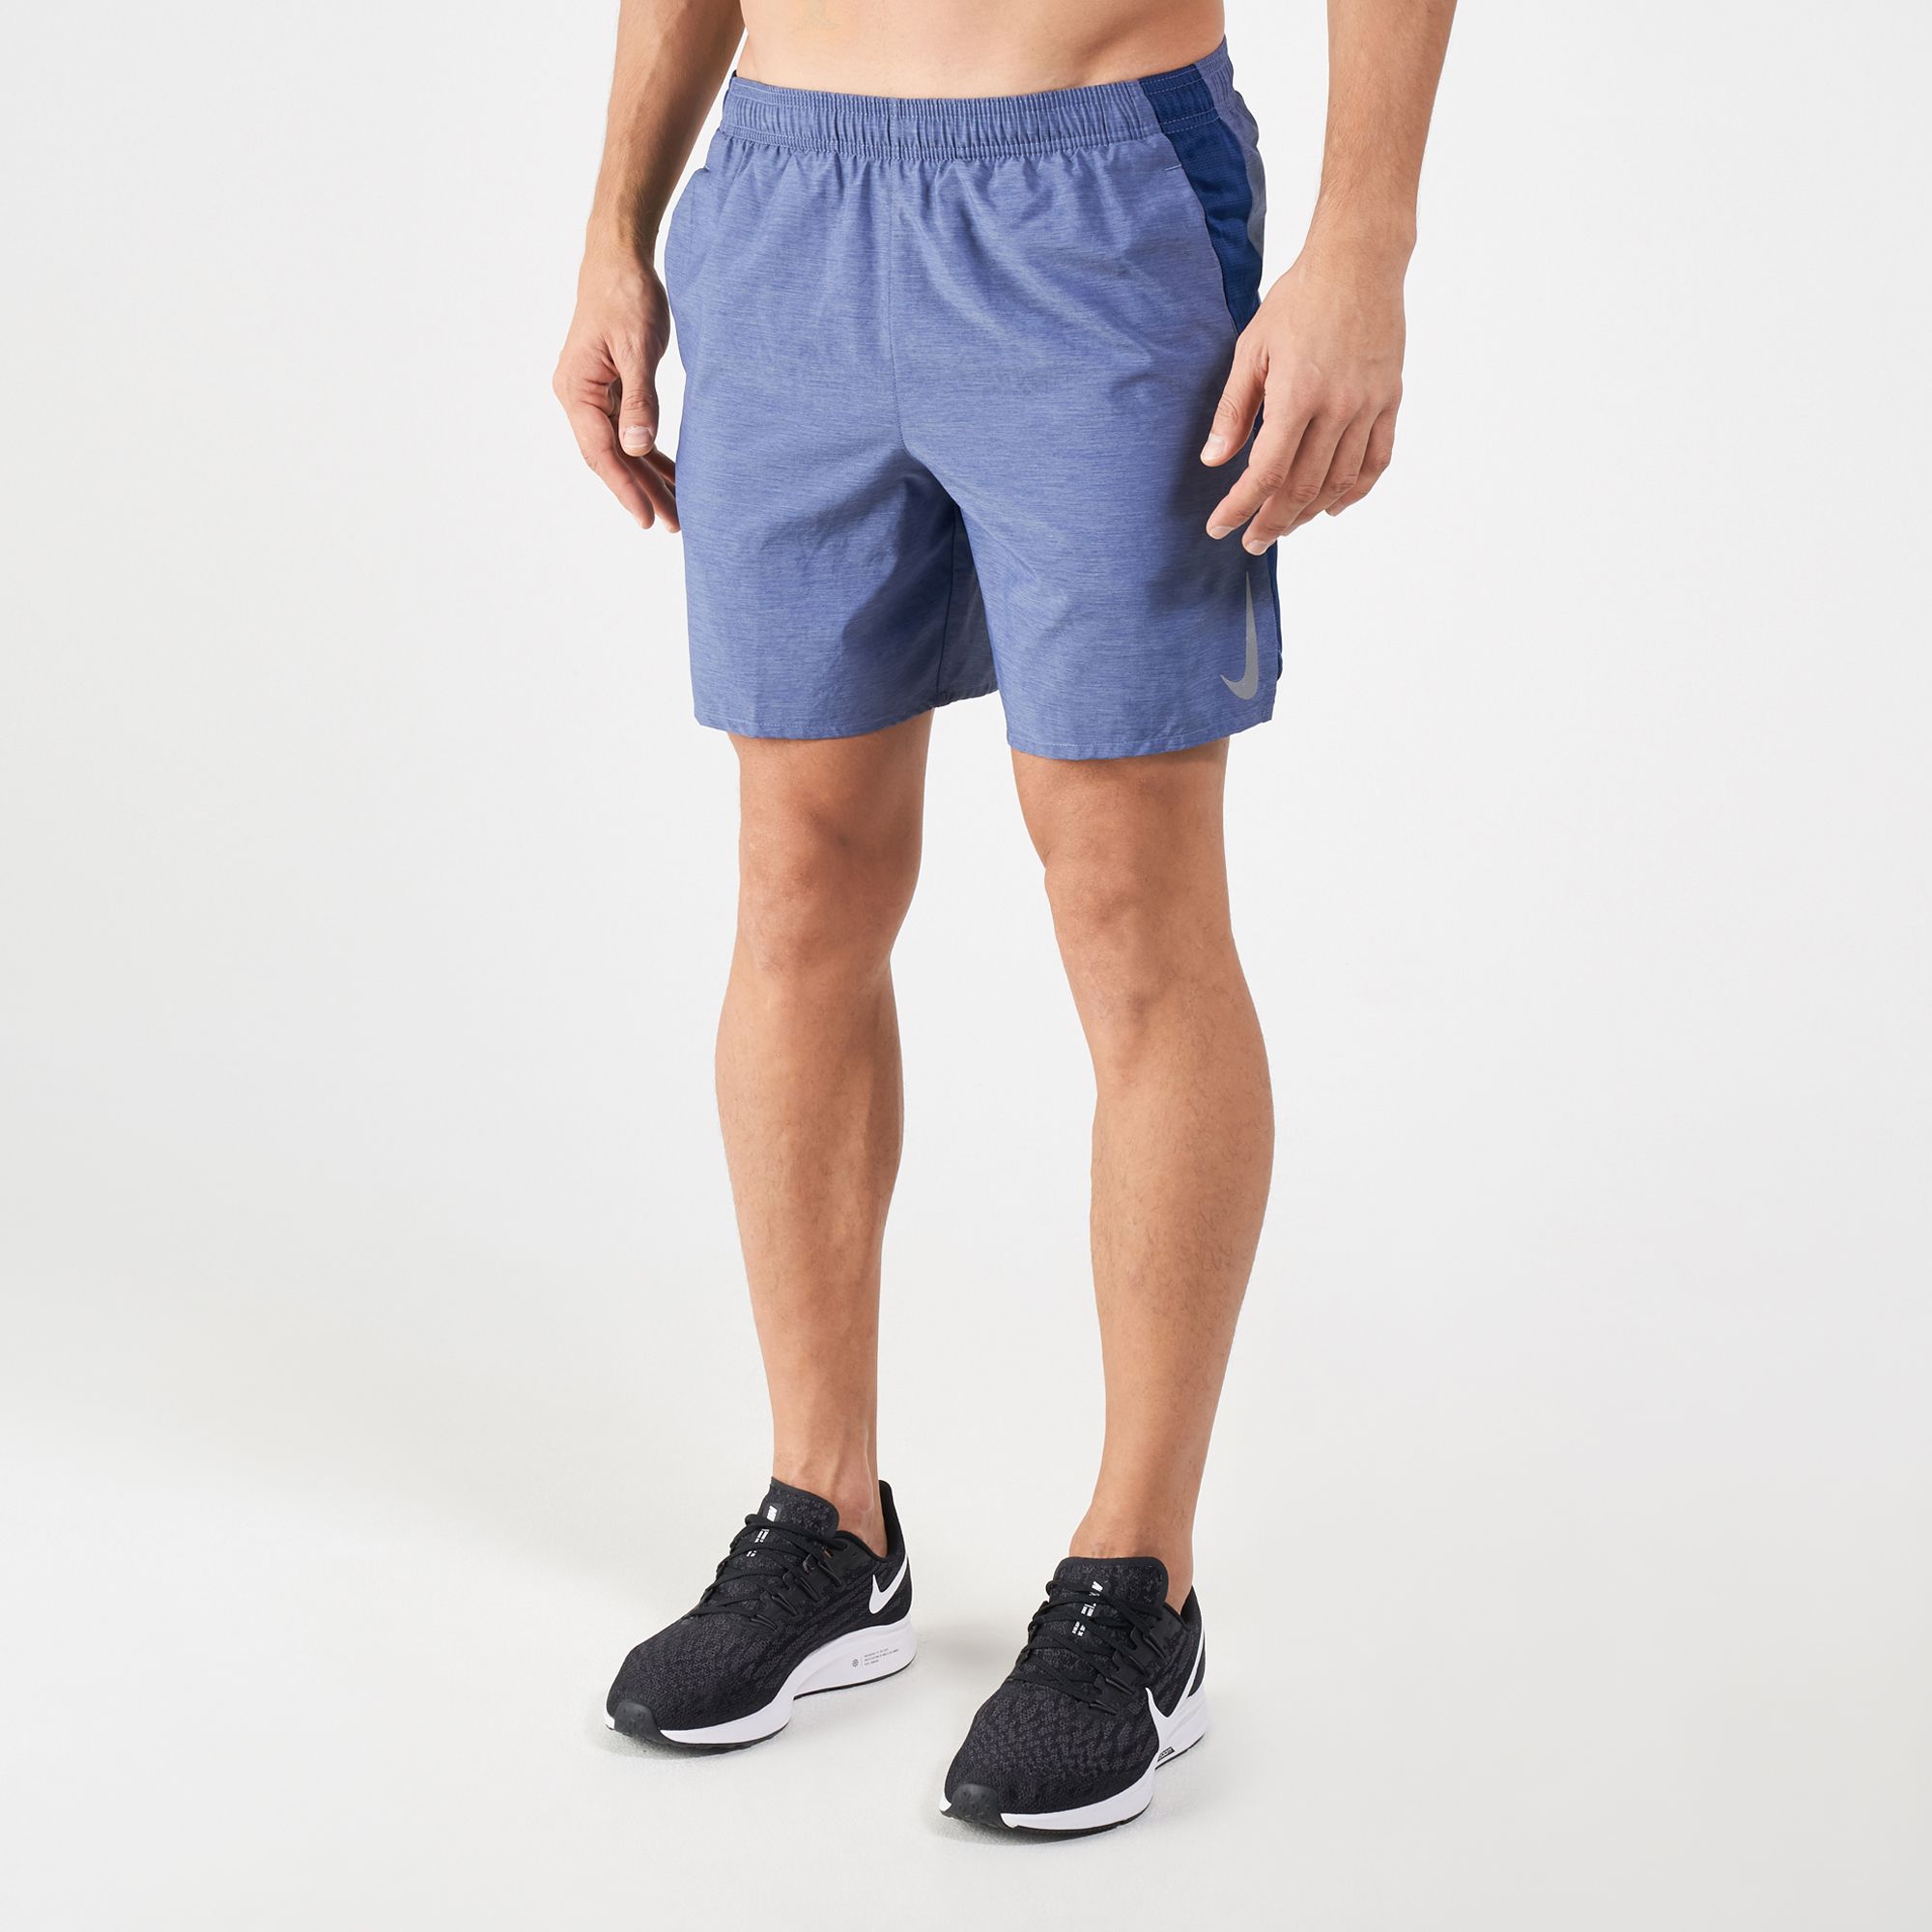 nike challenger shorts 7 inch